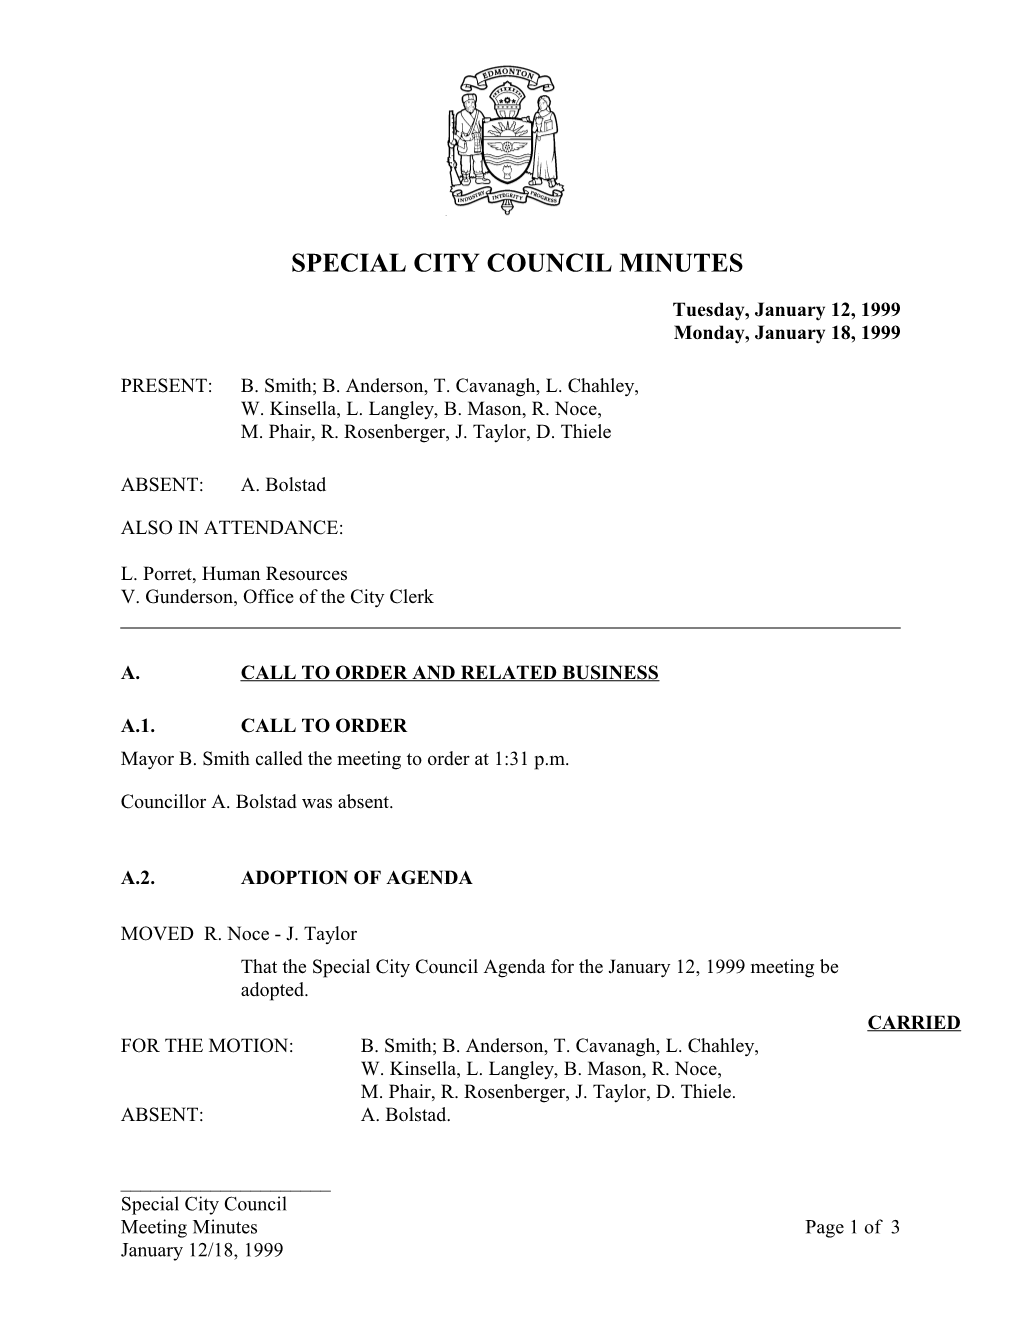 Minutes for City Council January 12, 1999 Meeting